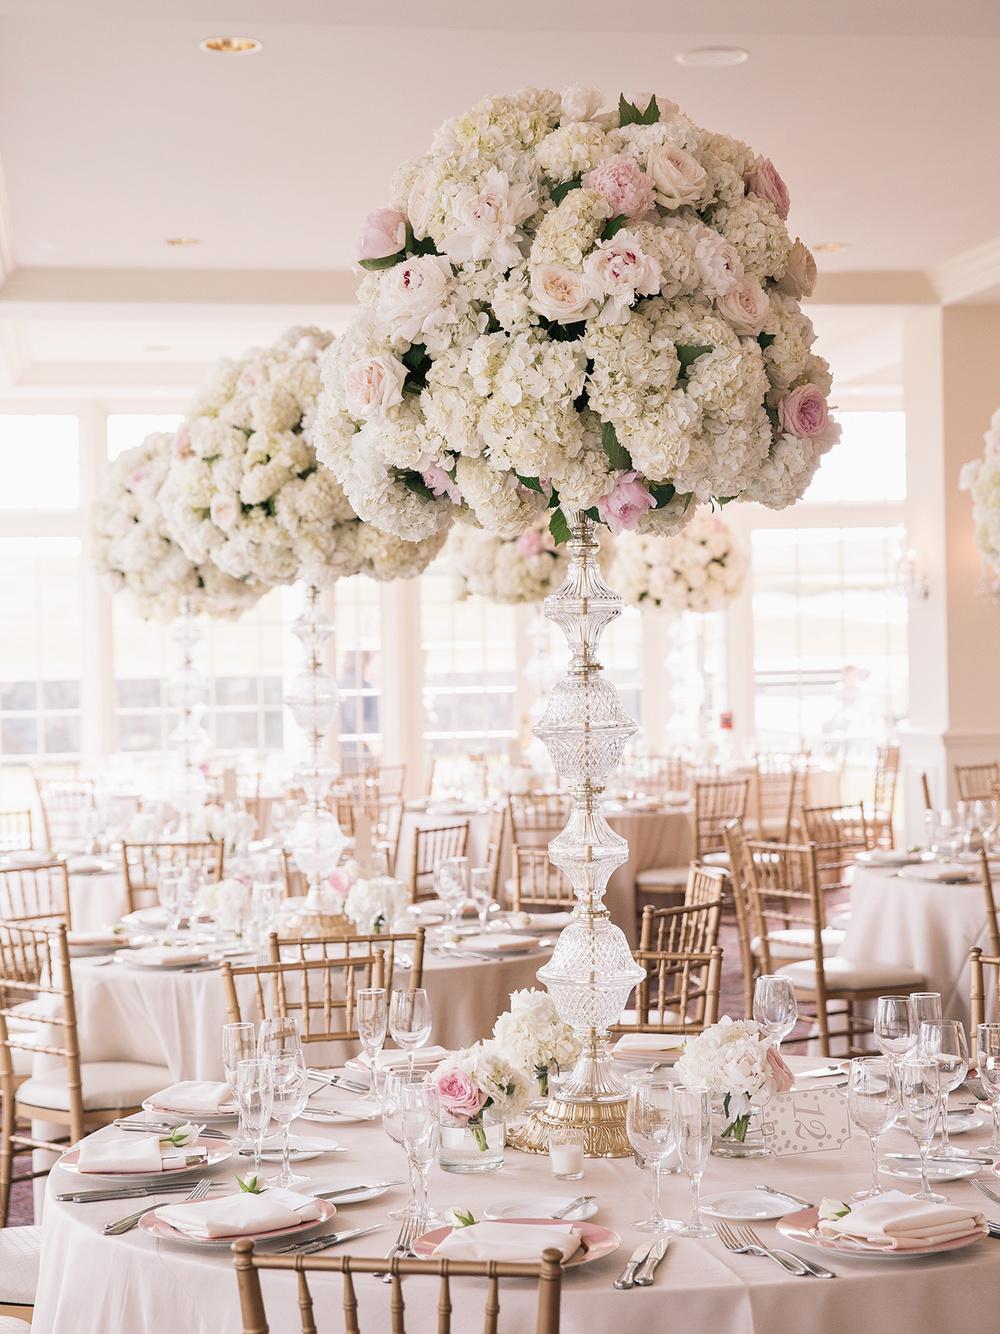 Plan a Country Club Wedding in New Jersey